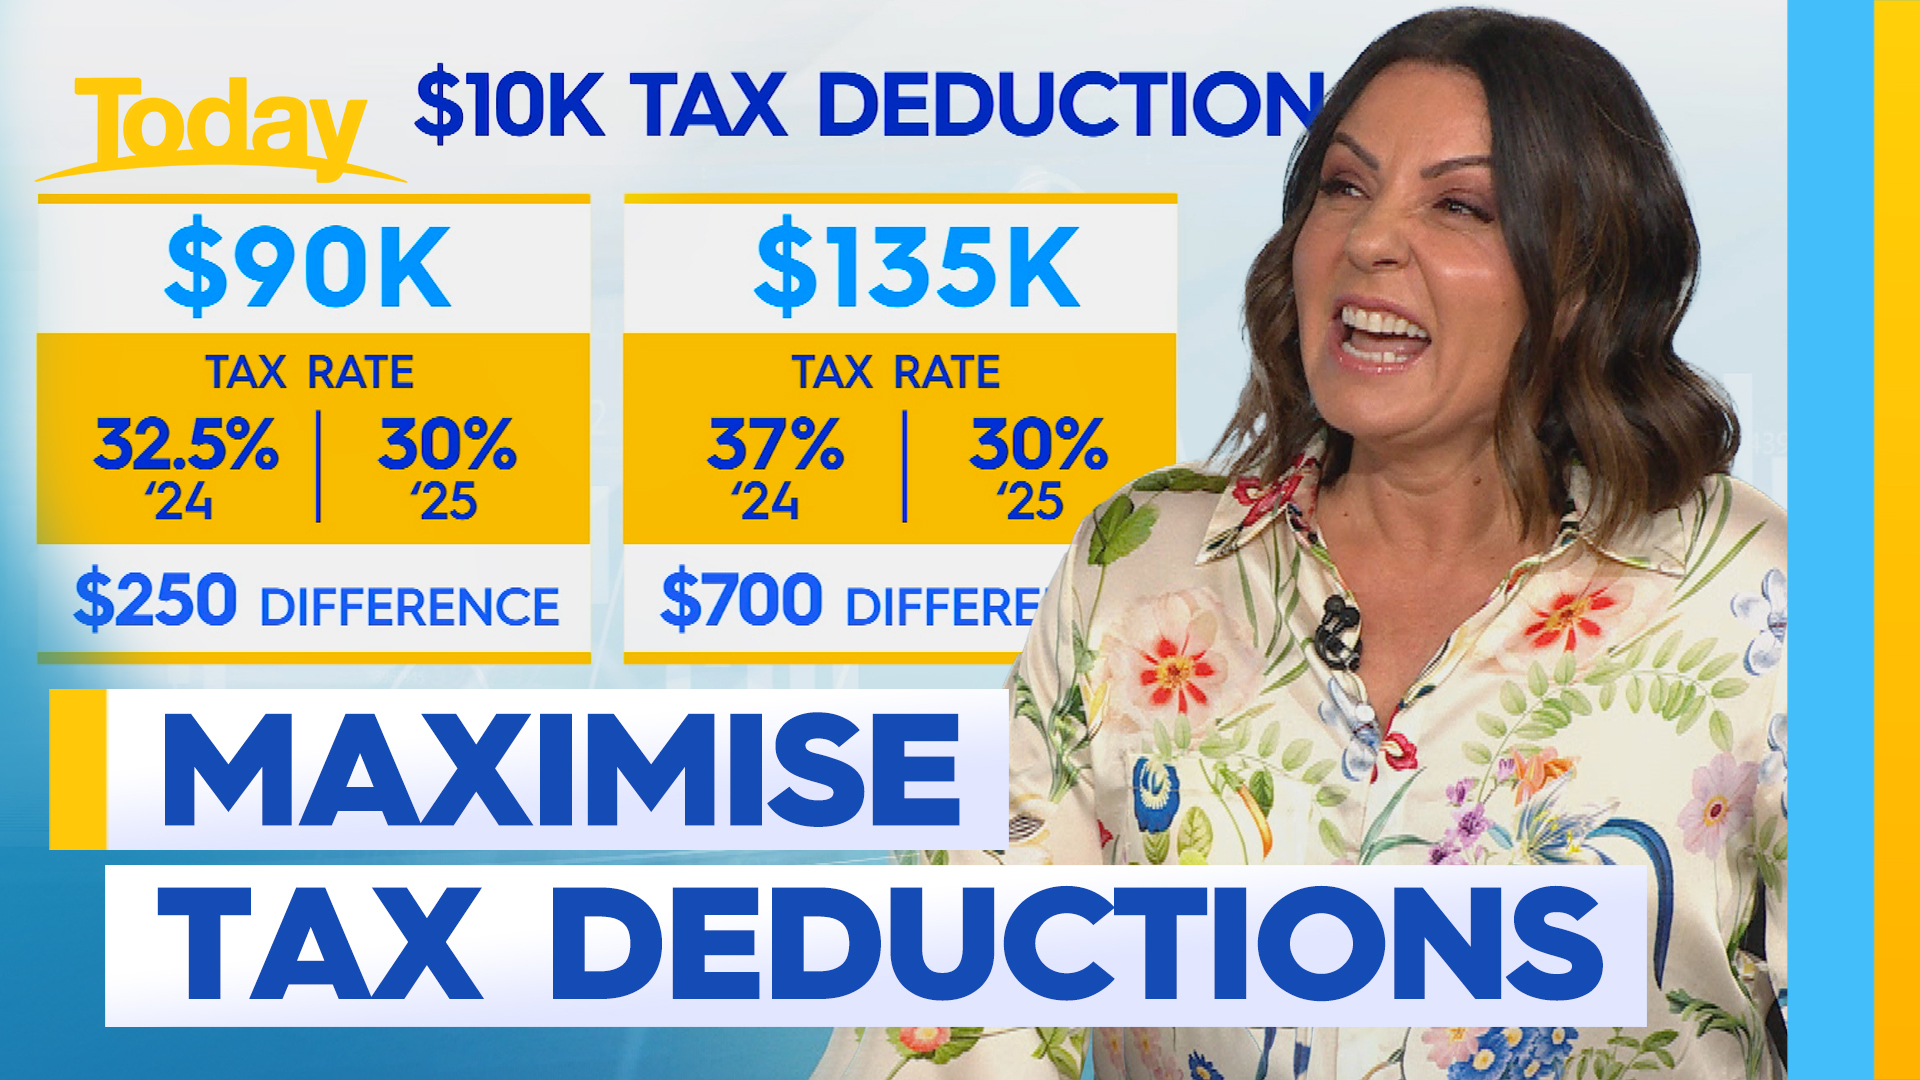 How to maximise your tax deductions this year